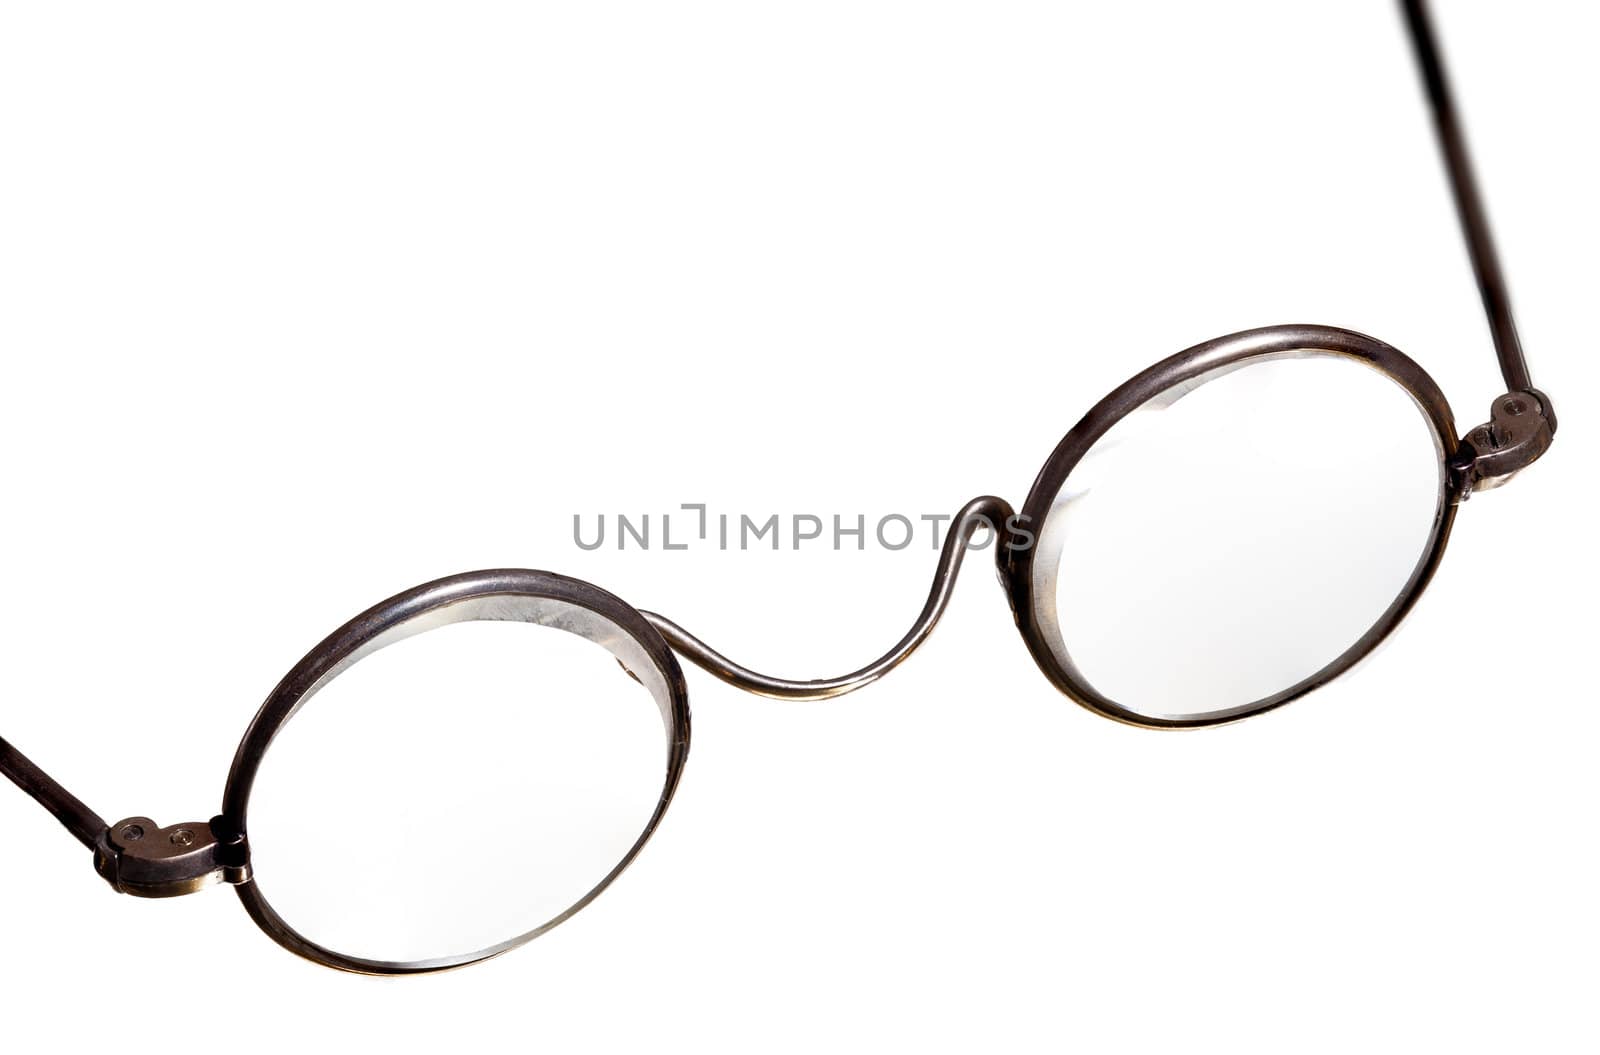 Old fashioned round reading glasses laying on a a white background and isolated